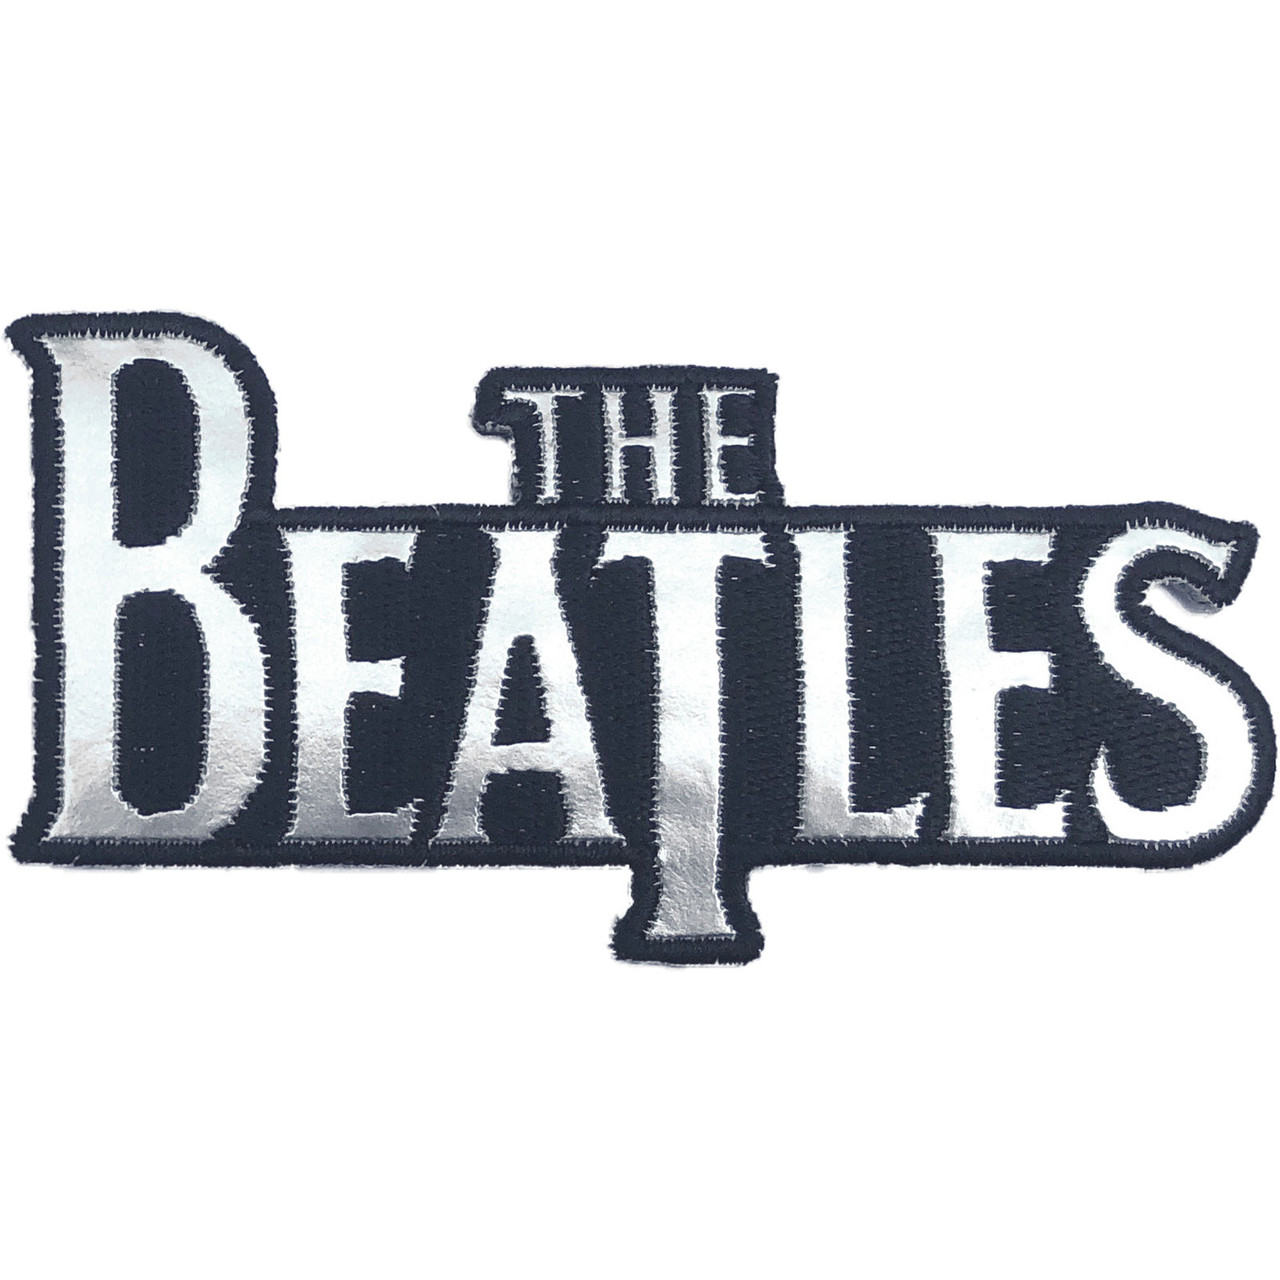 The Interesting History Behind The Beatles Logo